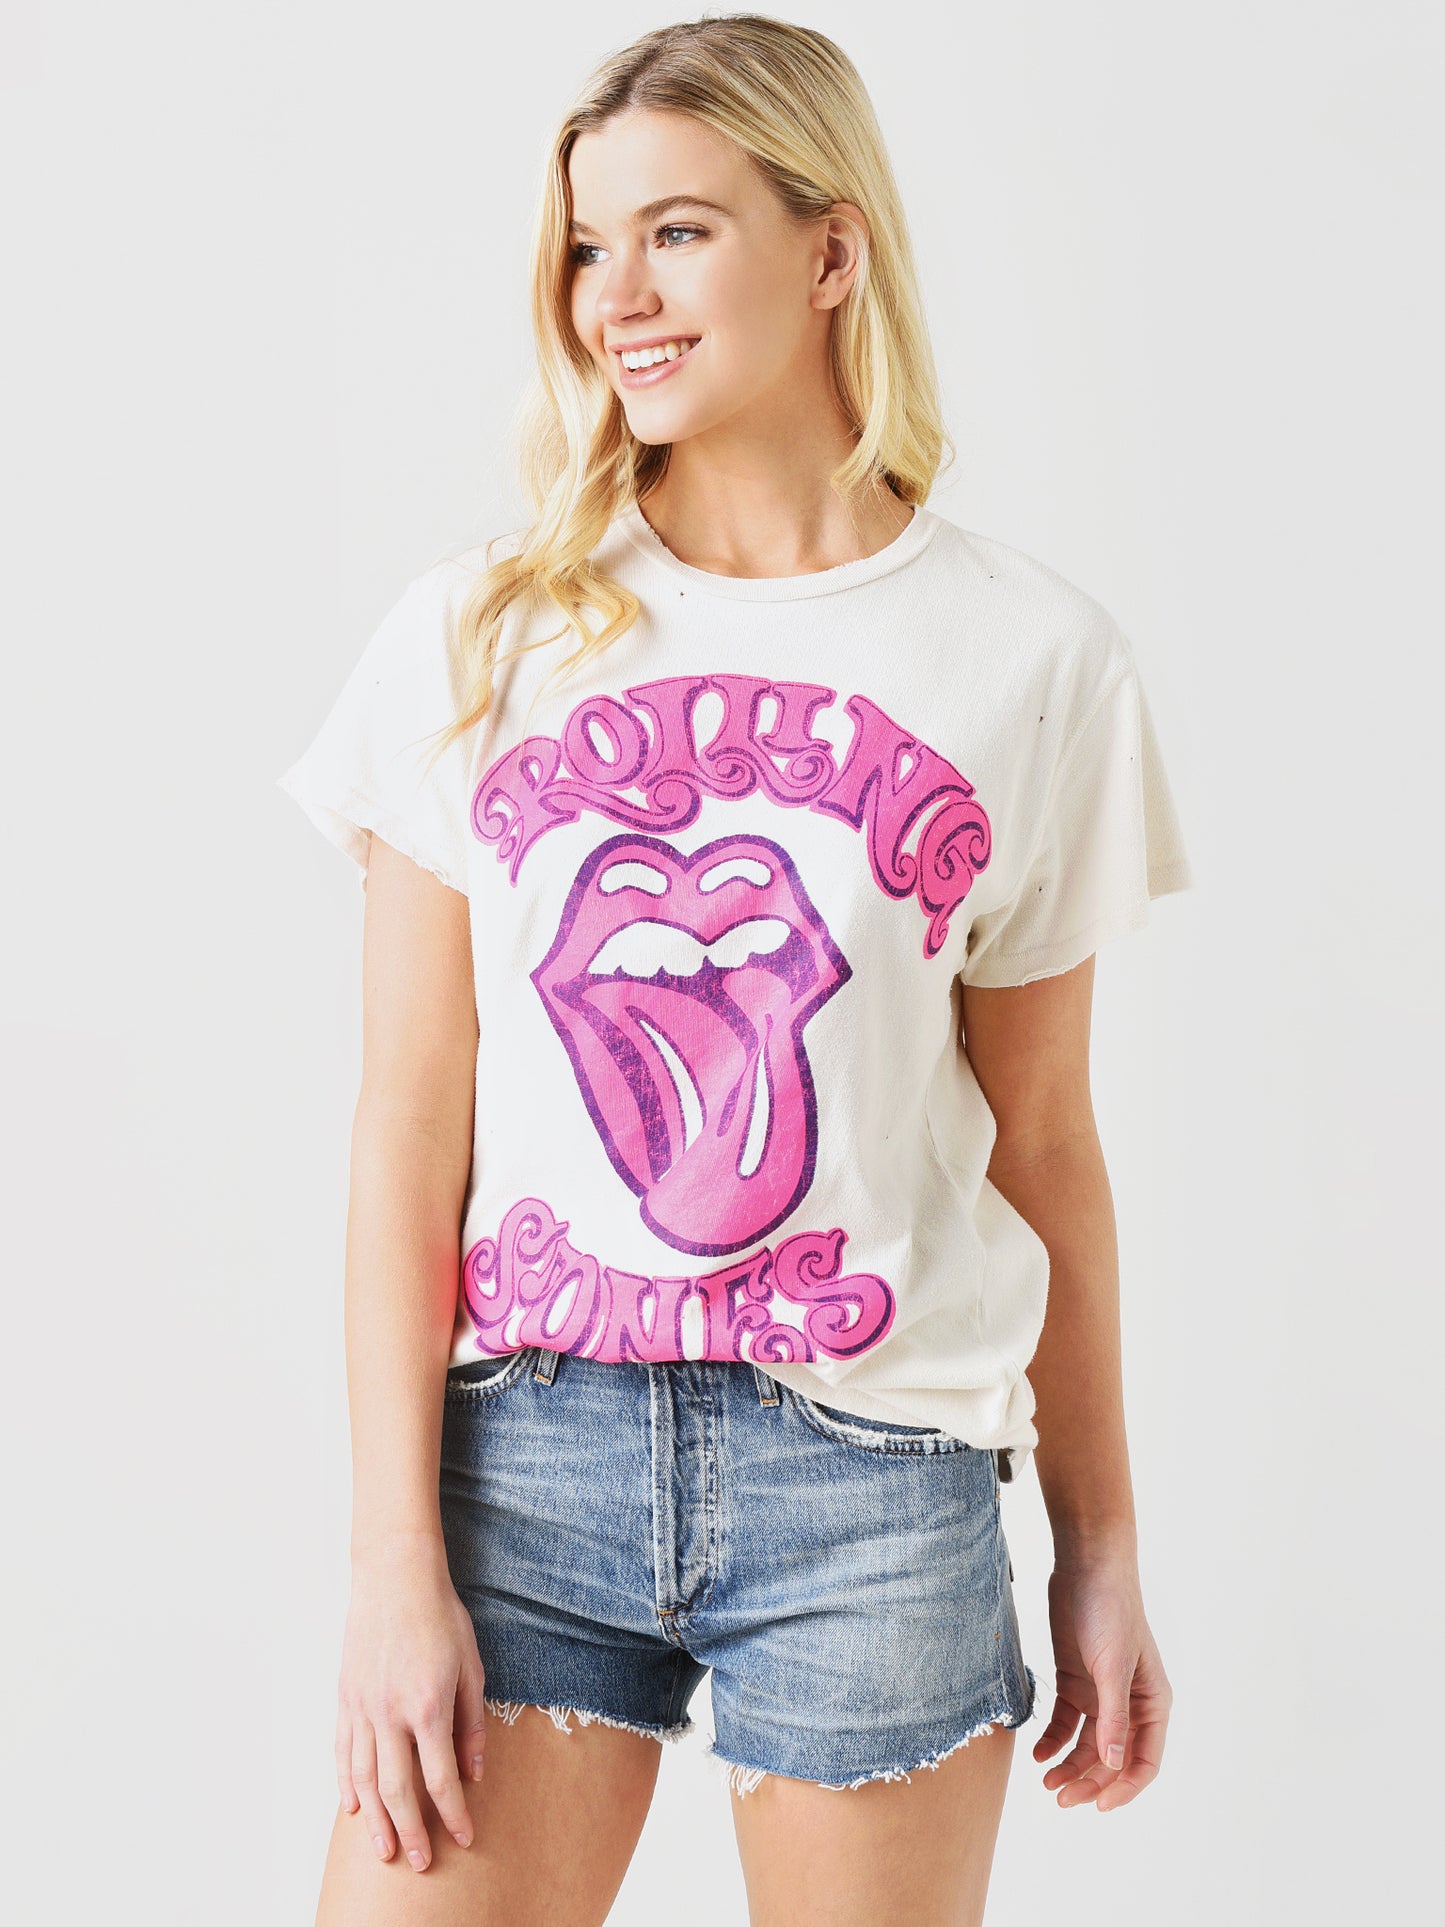 Madeworn Women's The Rolling Stones Vintage Graphic Tee